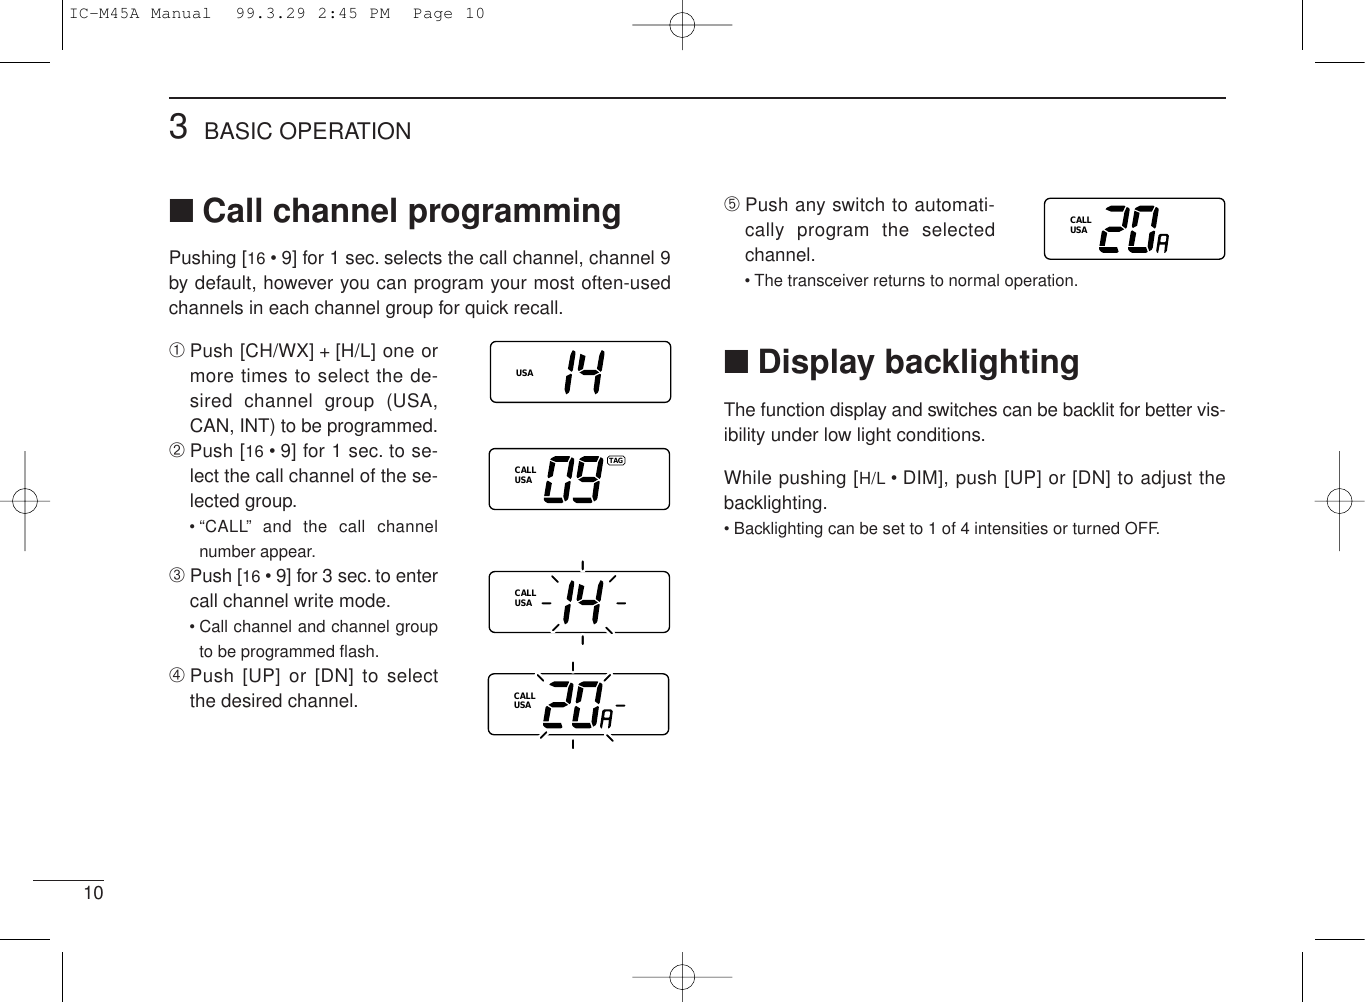 103BASIC OPERATION■Call channel programmingPushing [16 • 9] for 1 sec. selects the call channel, channel 9by default, however you can program your most often-usedchannels in each channel group for quick recall.➀Push [CH/WX] + [H/L] one ormore times to select the de-sired channel group (USA,CAN, INT) to be programmed.➁Push [16 • 9] for 1 sec. to se-lect the call channel of the se-lected group.• “CALL” and the call channelnumber appear.➂Push [16 • 9] for 3 sec. to entercall channel write mode.• Call channel and channel groupto be programmed ﬂash.➃Push [UP] or [DN] to selectthe desired channel.USACALLUSATAGCALLUSACALLUSA➄Push any switch to automati-cally program the selectedchannel.• The transceiver returns to normal operation.■Display backlightingThe function display and switches can be backlit for better vis-ibility under low light conditions.While pushing [H/L • DIM], push [UP] or [DN] to adjust thebacklighting.• Backlighting can be set to 1 of 4 intensities or turned OFF.CALLUSAIC-M45A Manual  99.3.29 2:45 PM  Page 10